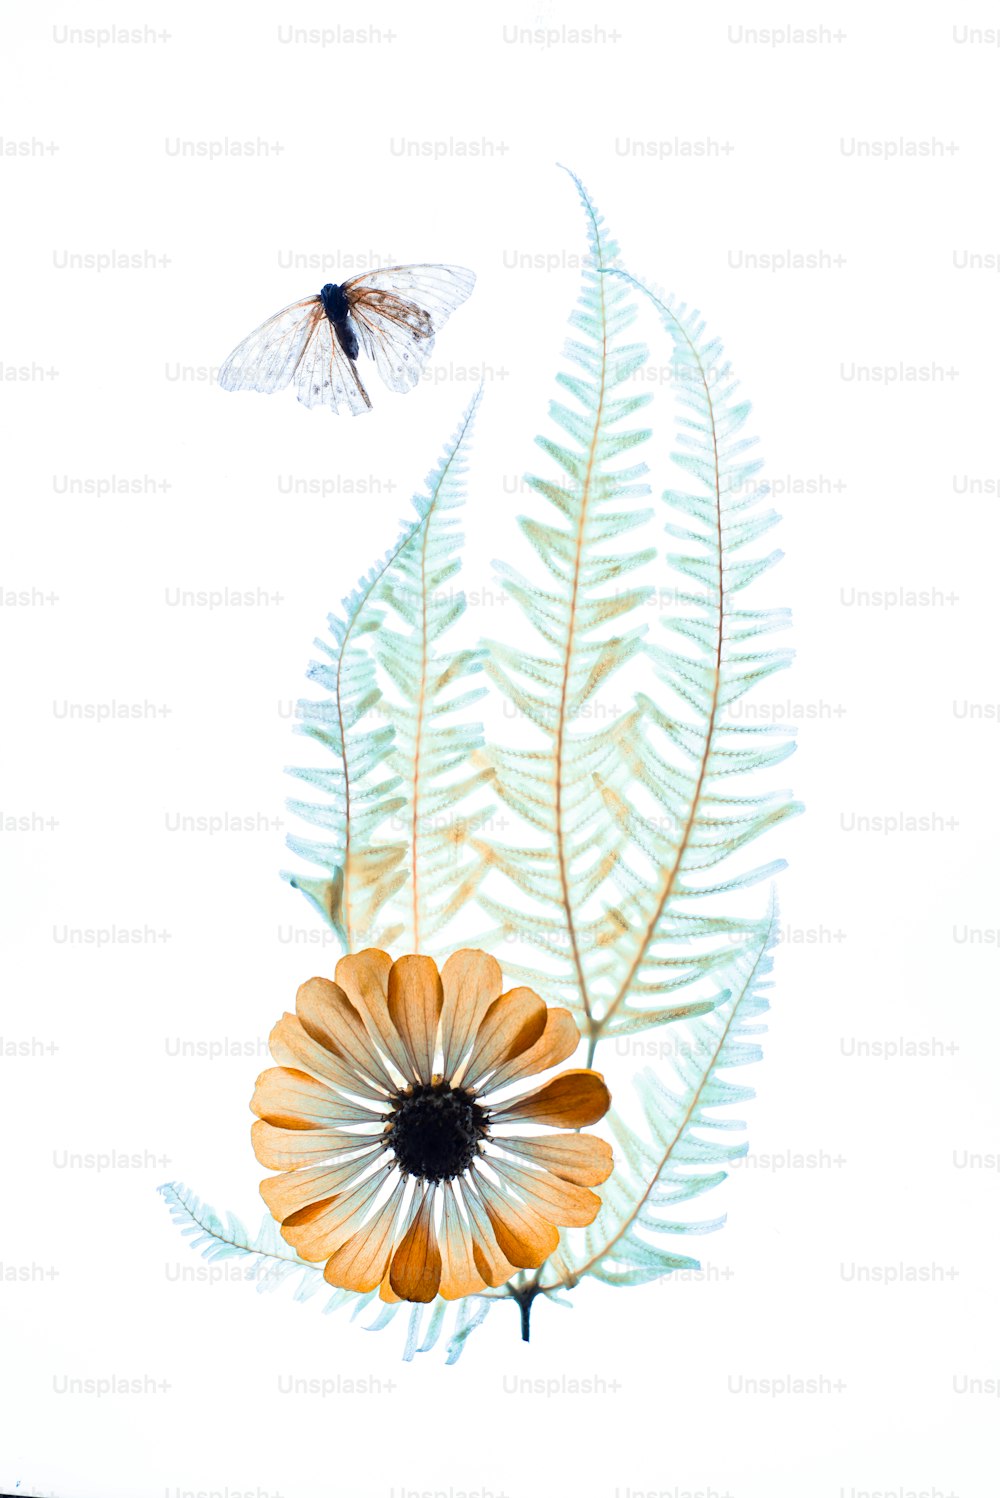 Press Dried Rose Flower Petals on Notebook Page, on White Carpet Fur Stock  Image - Image of note, flora: 83692419